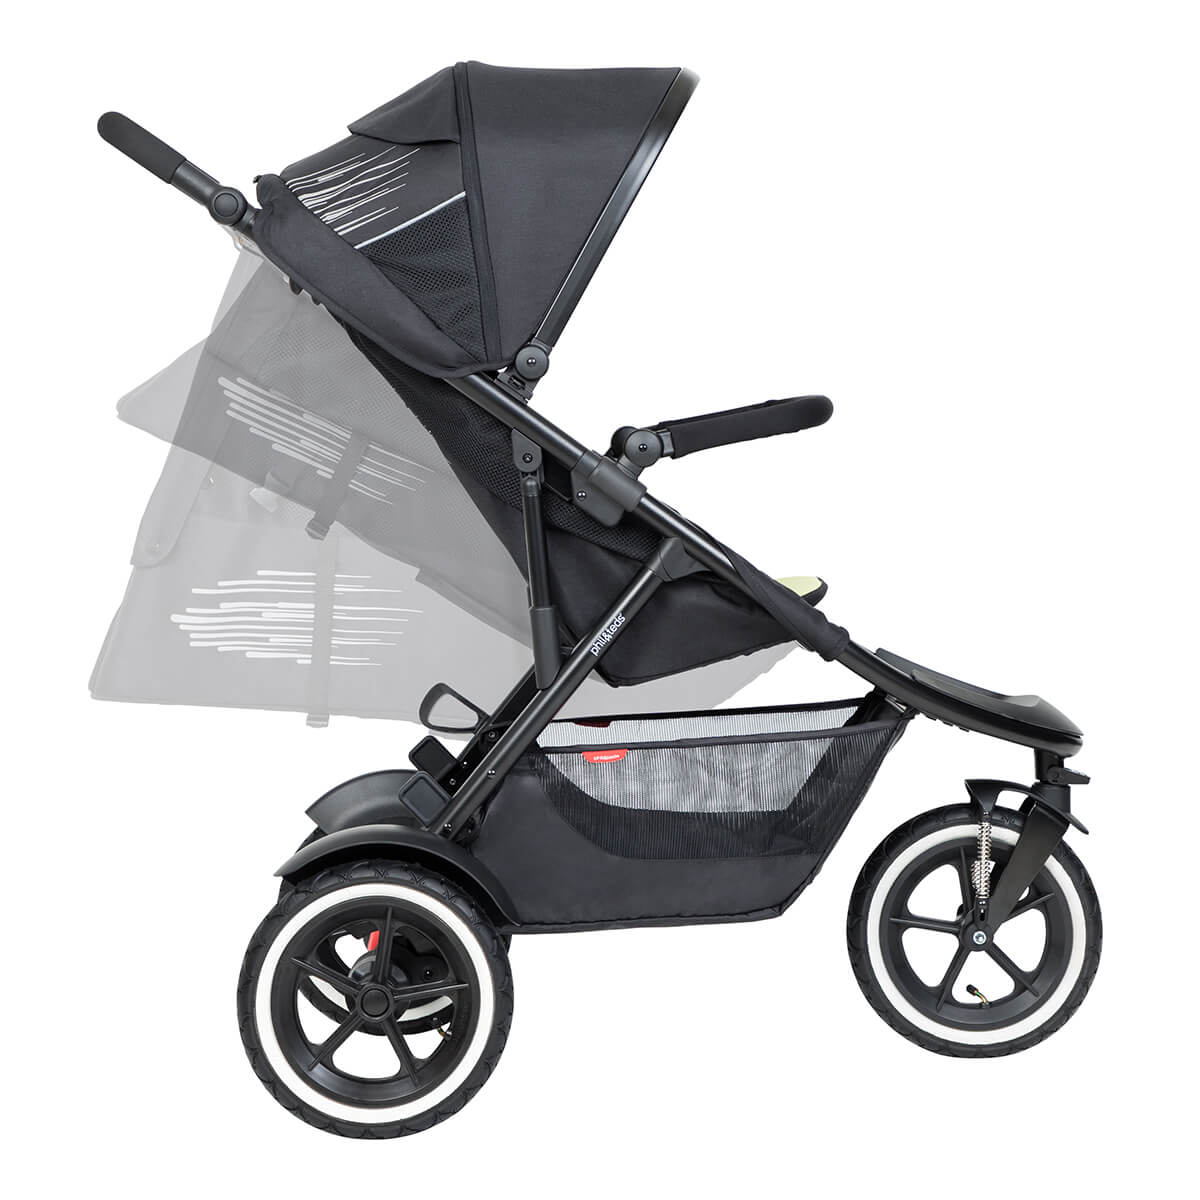 https://cdn.accentuate.io/4546157248617/19119322628201/philteds-sport-buggy-can-recline-in-multiple-angles-including-full-recline-for-newborn-baby-v1626484907218.jpg?1200x1200